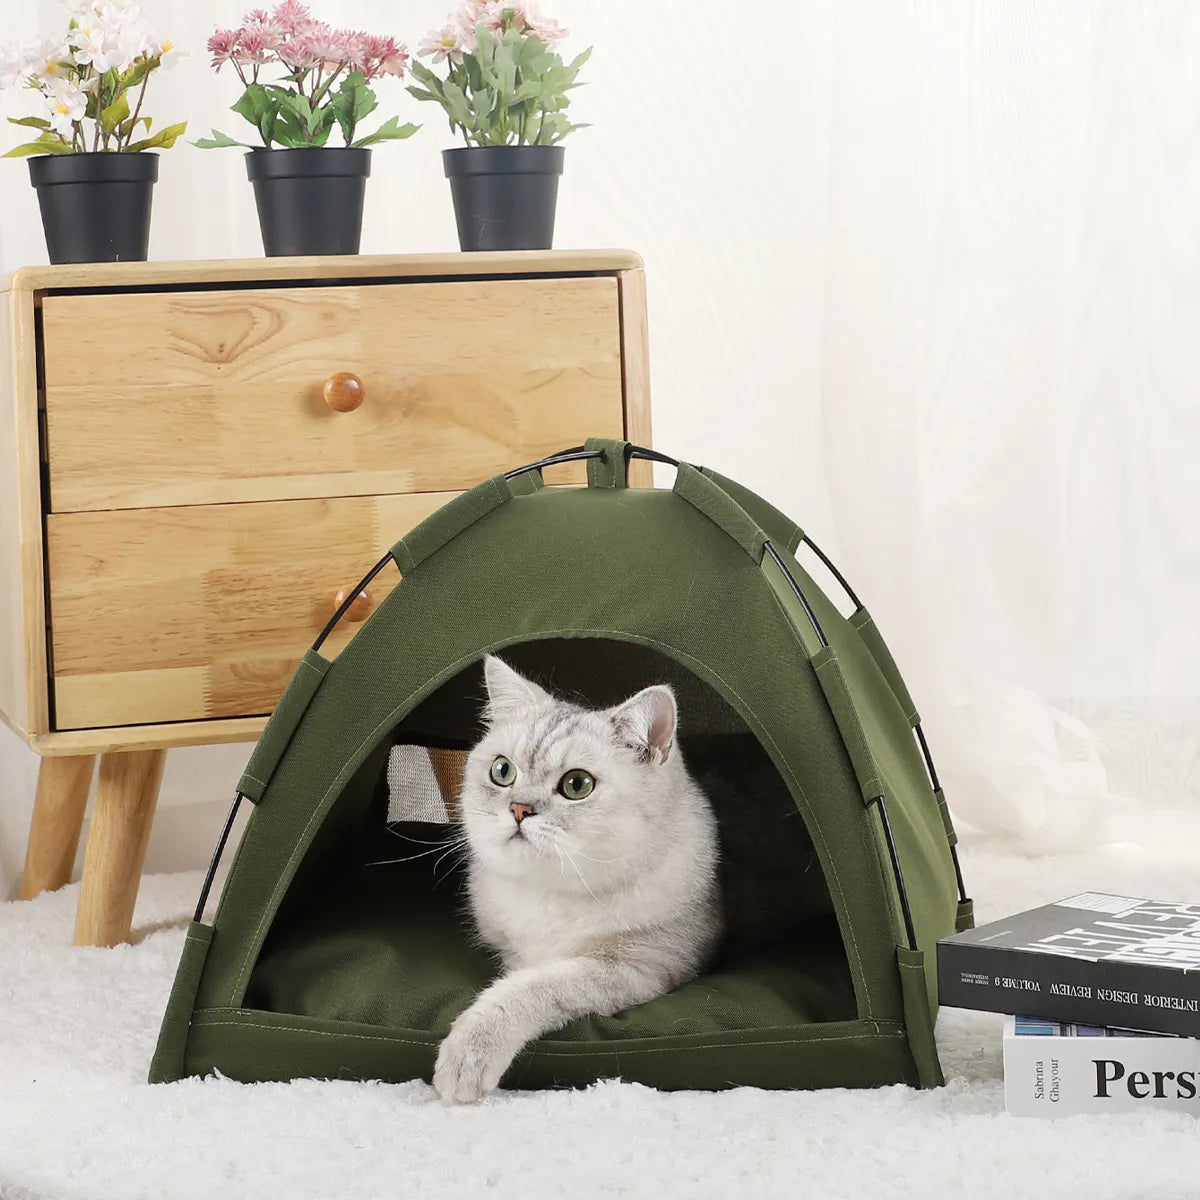 BeiYu Pet Tent Bed - Cozy Winter Clamshell Cat House with Warm Cushions